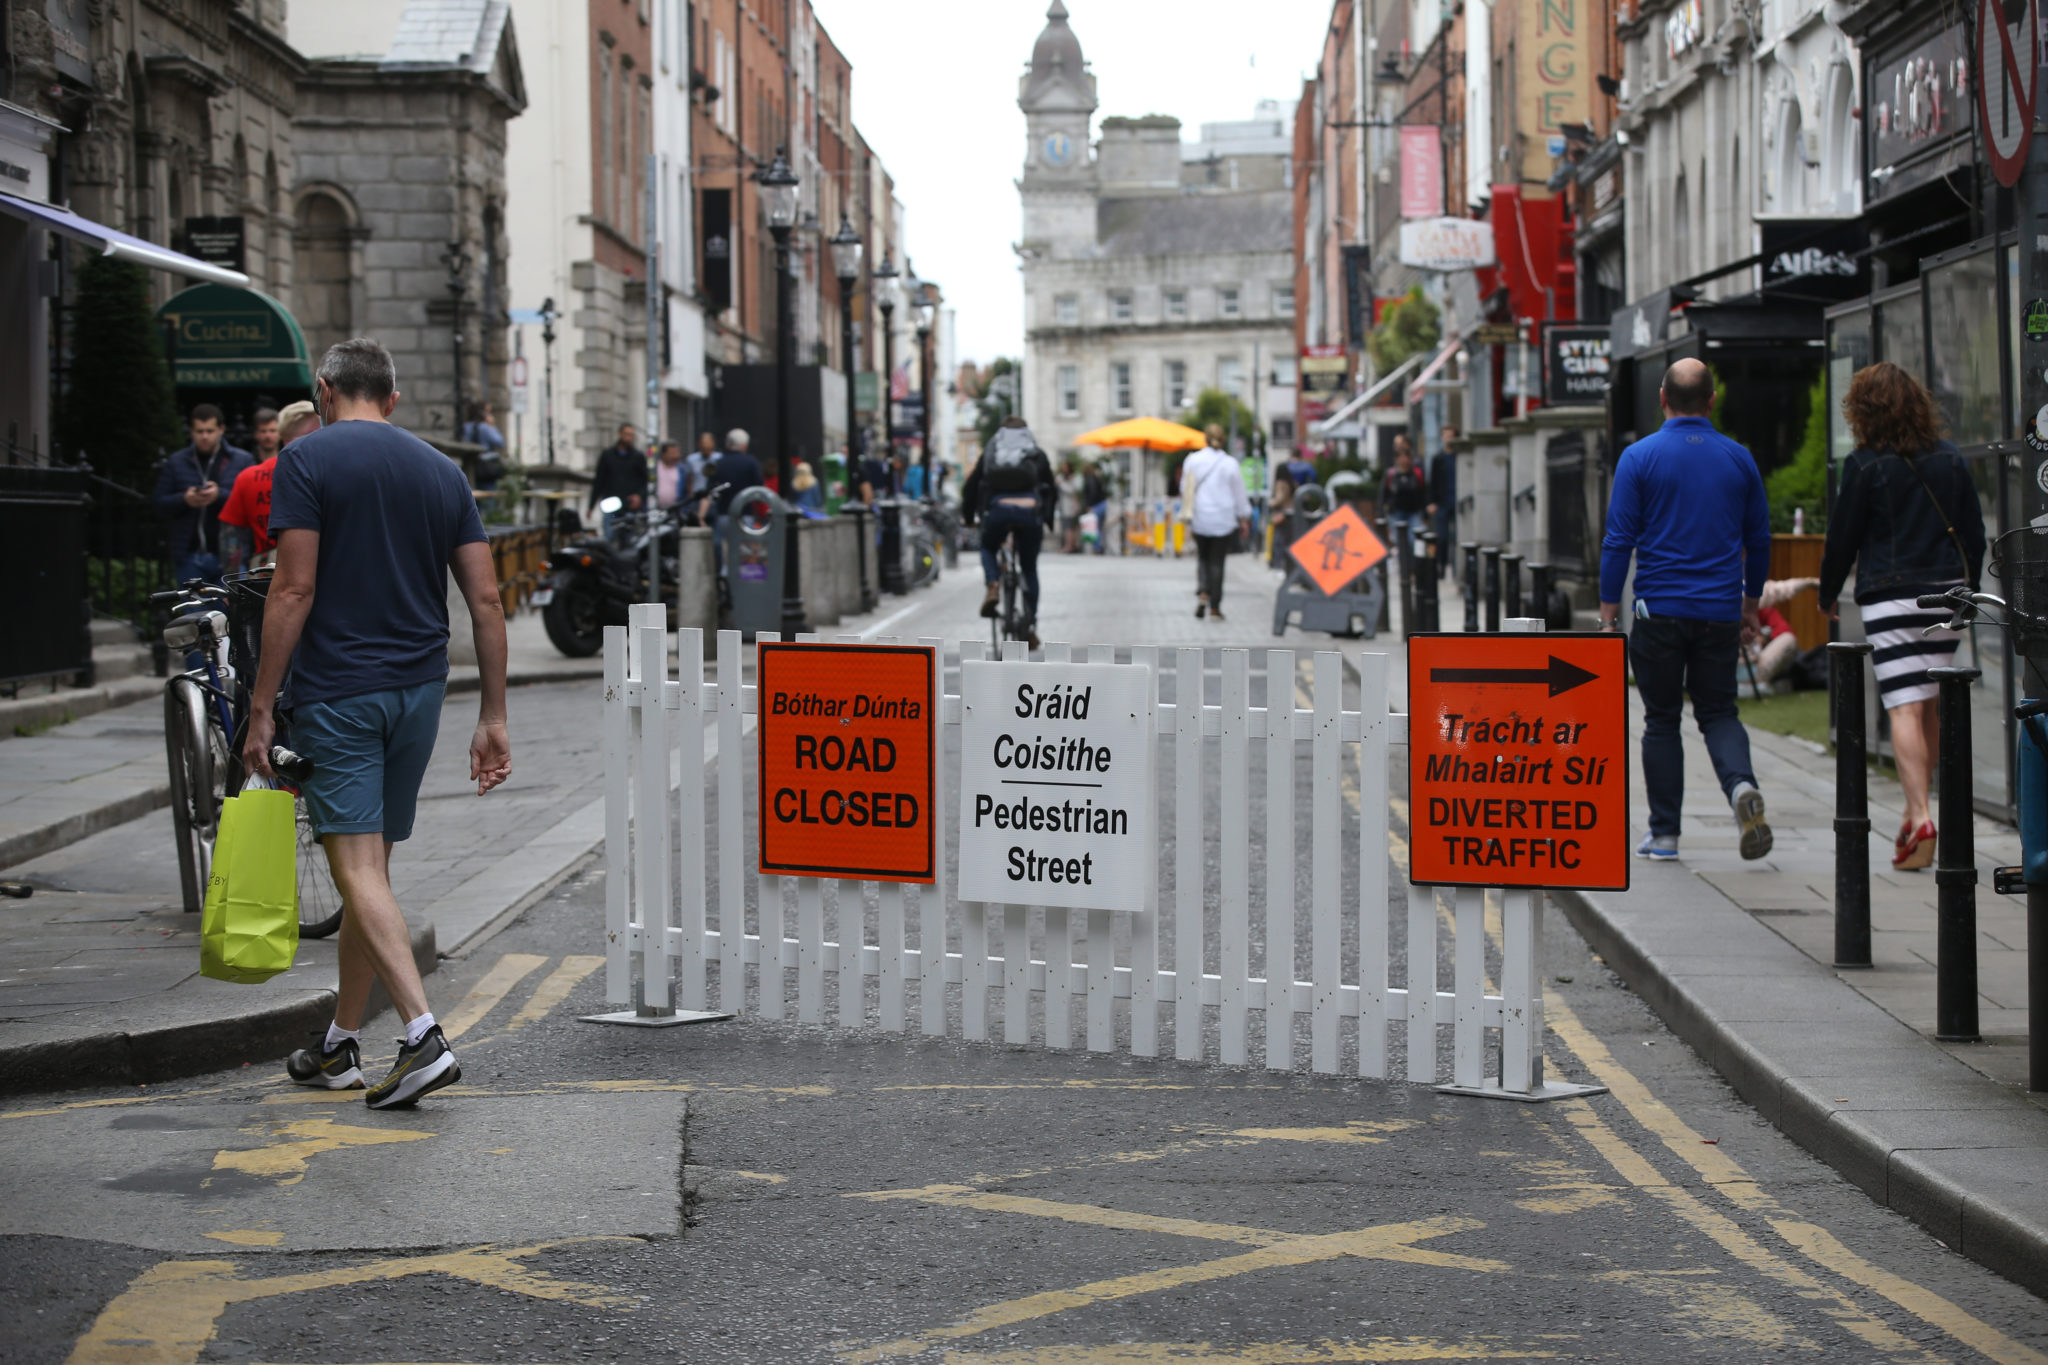 The pedestrianised South William Street in Dublin